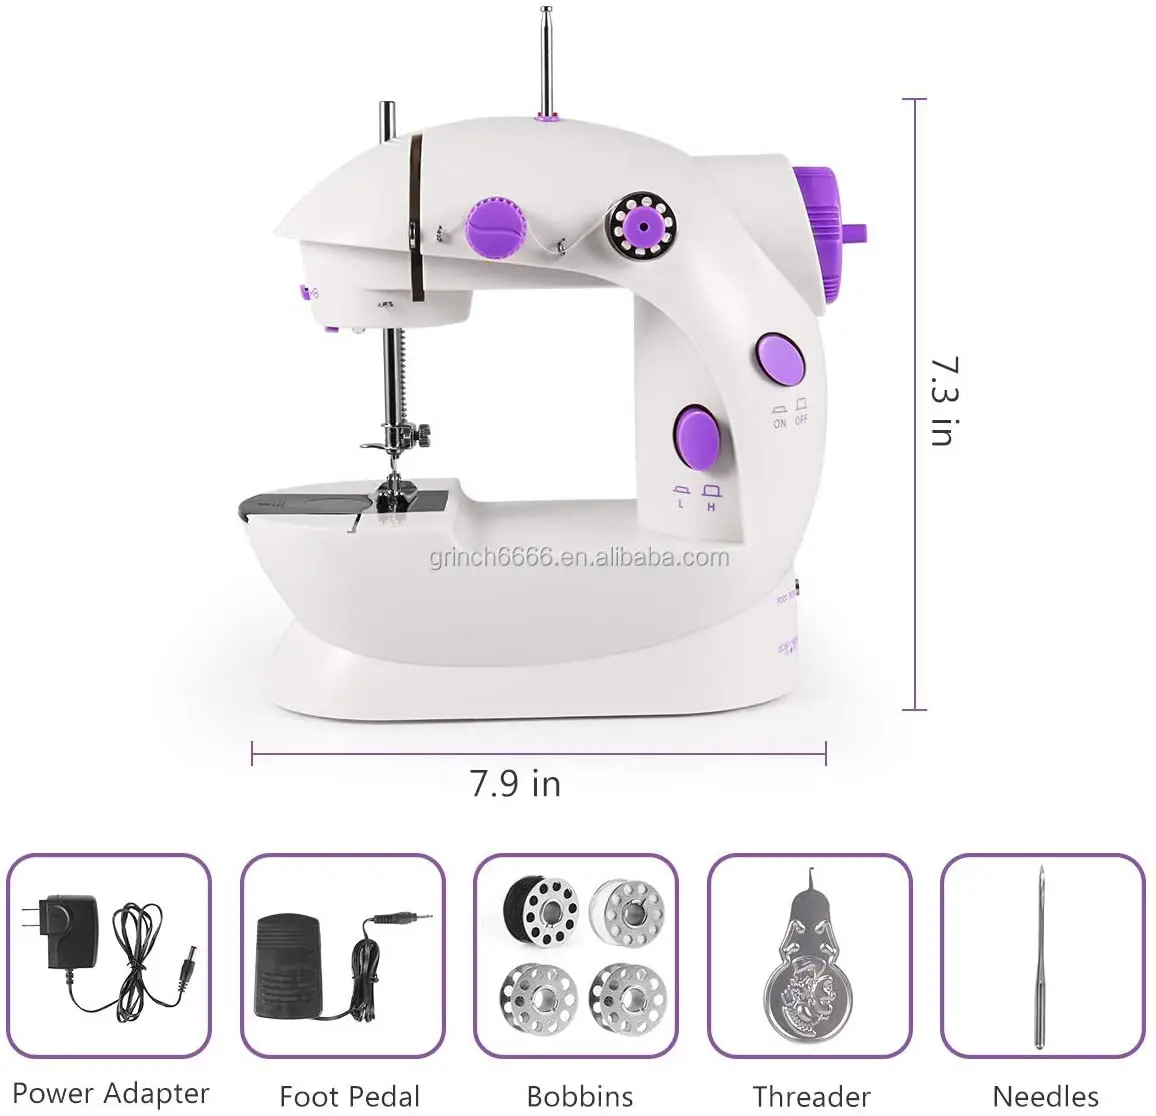 high and Low Speed Basic Electric Sewing Machine with Extension Table and Foot Pedal Suitable for Beginners Home Gifts Kacsoo Portable Mini Sewing Machine 